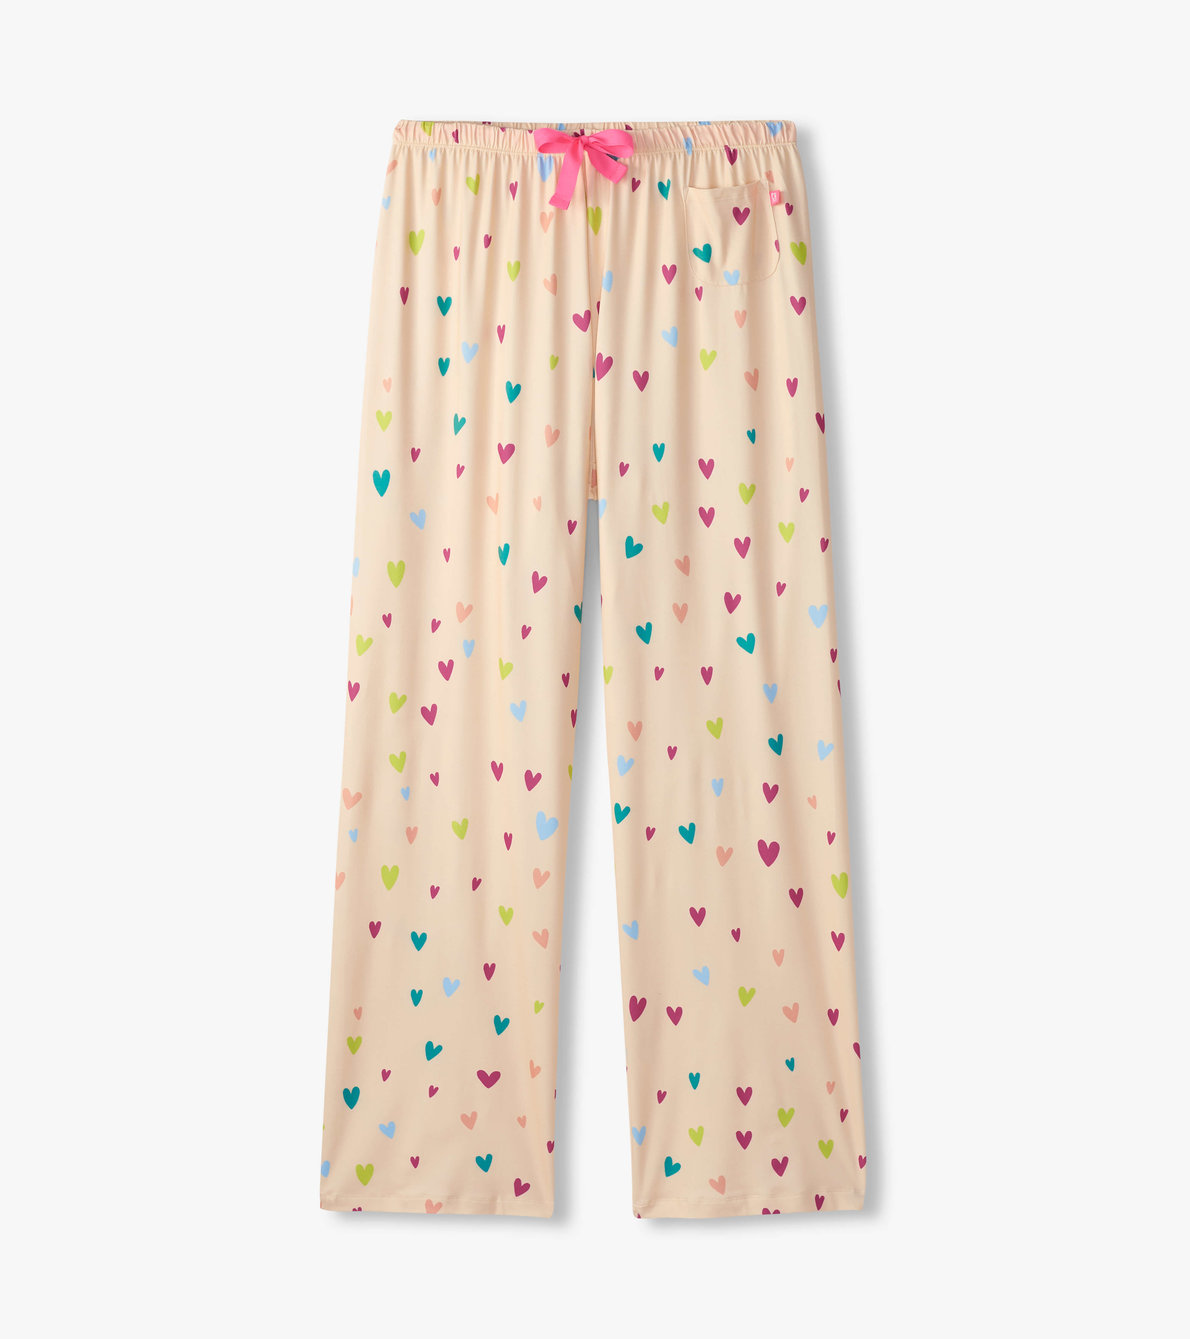 View larger image of Capelton Road Women's Jelly Bean Hearts Pajama Pants